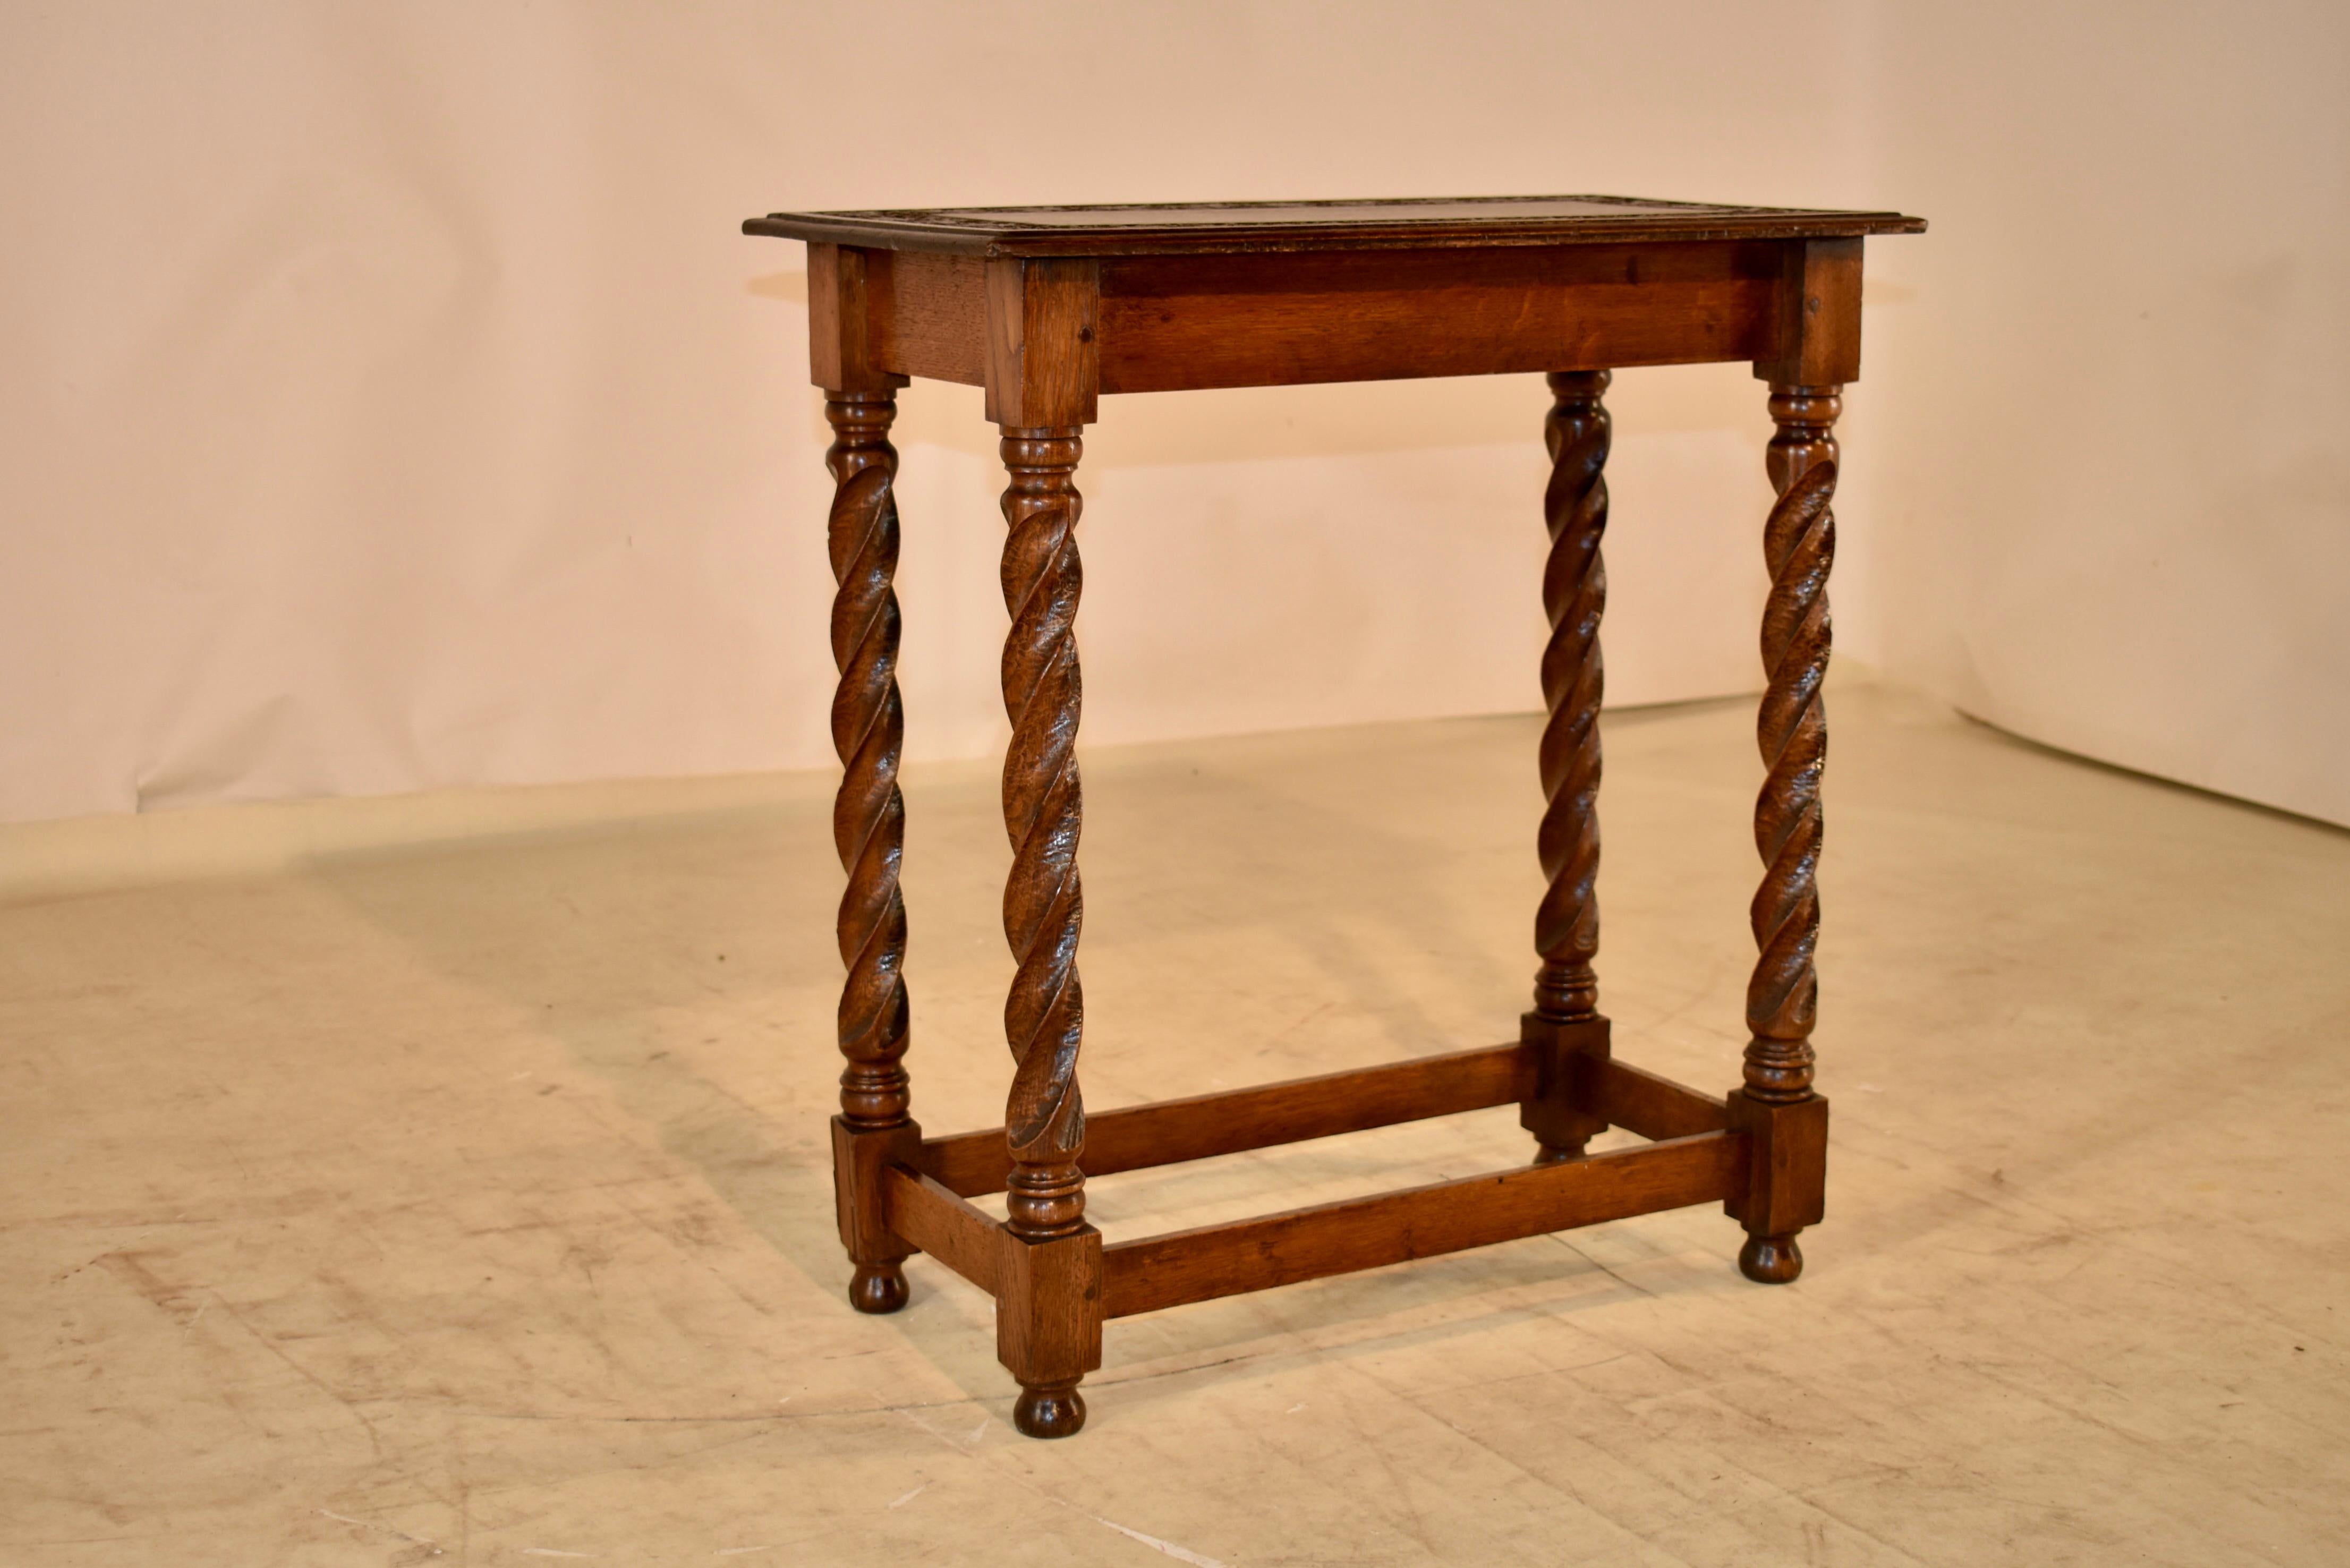 19th century oak side table from France with a hand carved banding on the top, depicting lovely leaves and a beveled edge. The apron is simple, and the table is supported on hand carved ribbon twist legs, joined by simple stretchers and raised on